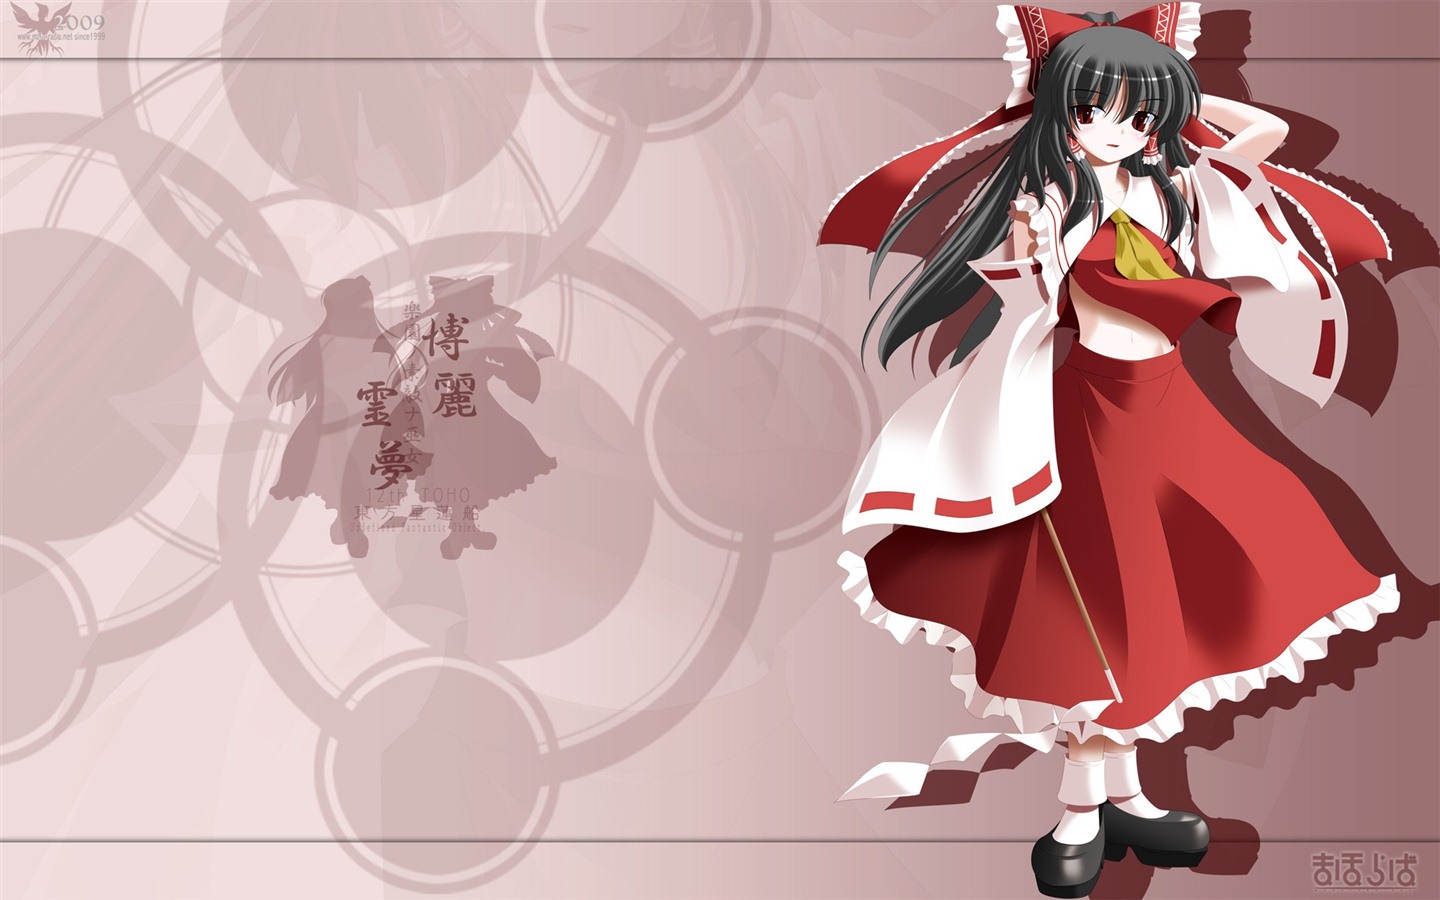 Touhou Project caricature HD wallpapers #10 - 1440x900